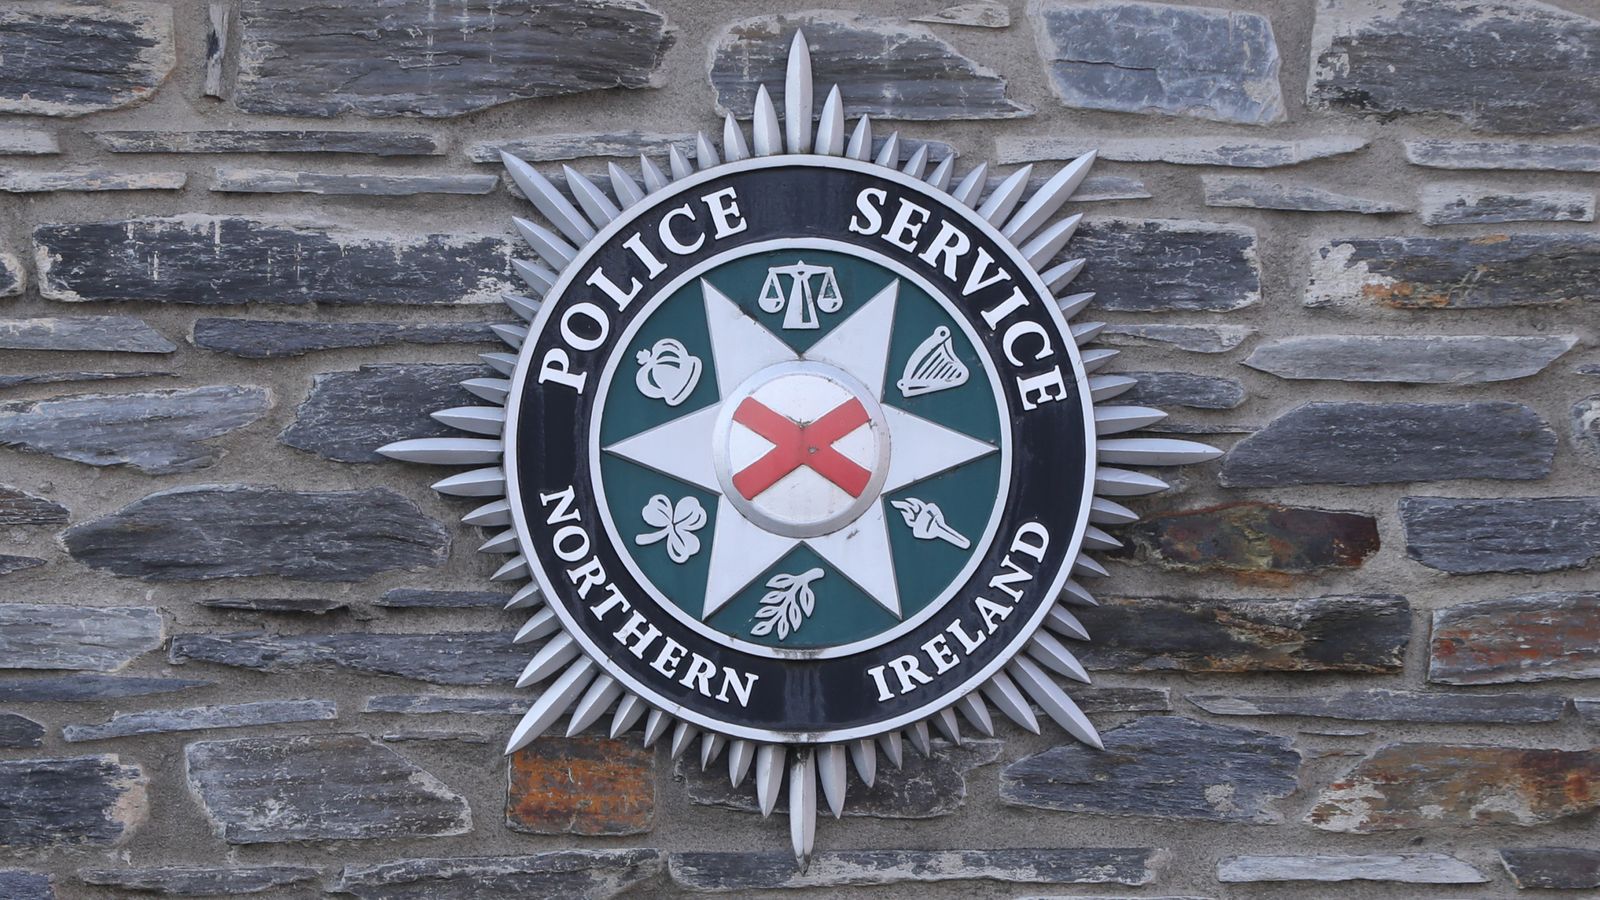 PSNI data breach: Two men arrested under Terrorism Act in investigation over 'linked criminality'